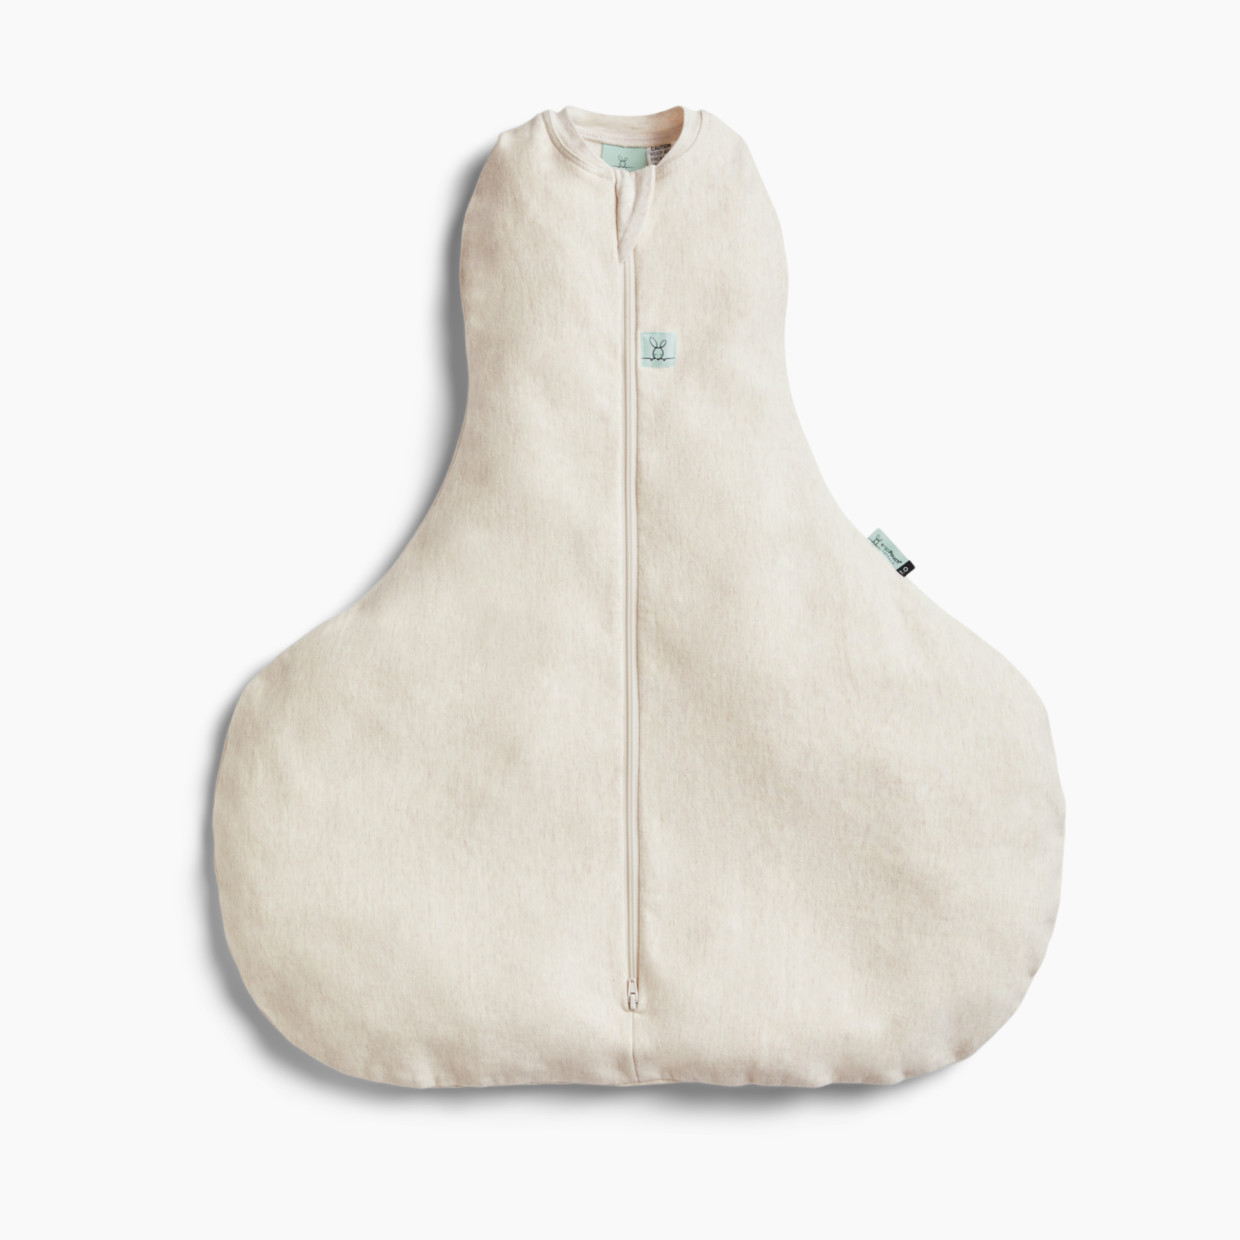 ergoPouch Cocoon Hip Harness Sack 1.0 Tog - Oatmeal Marle, 6-12 Months.